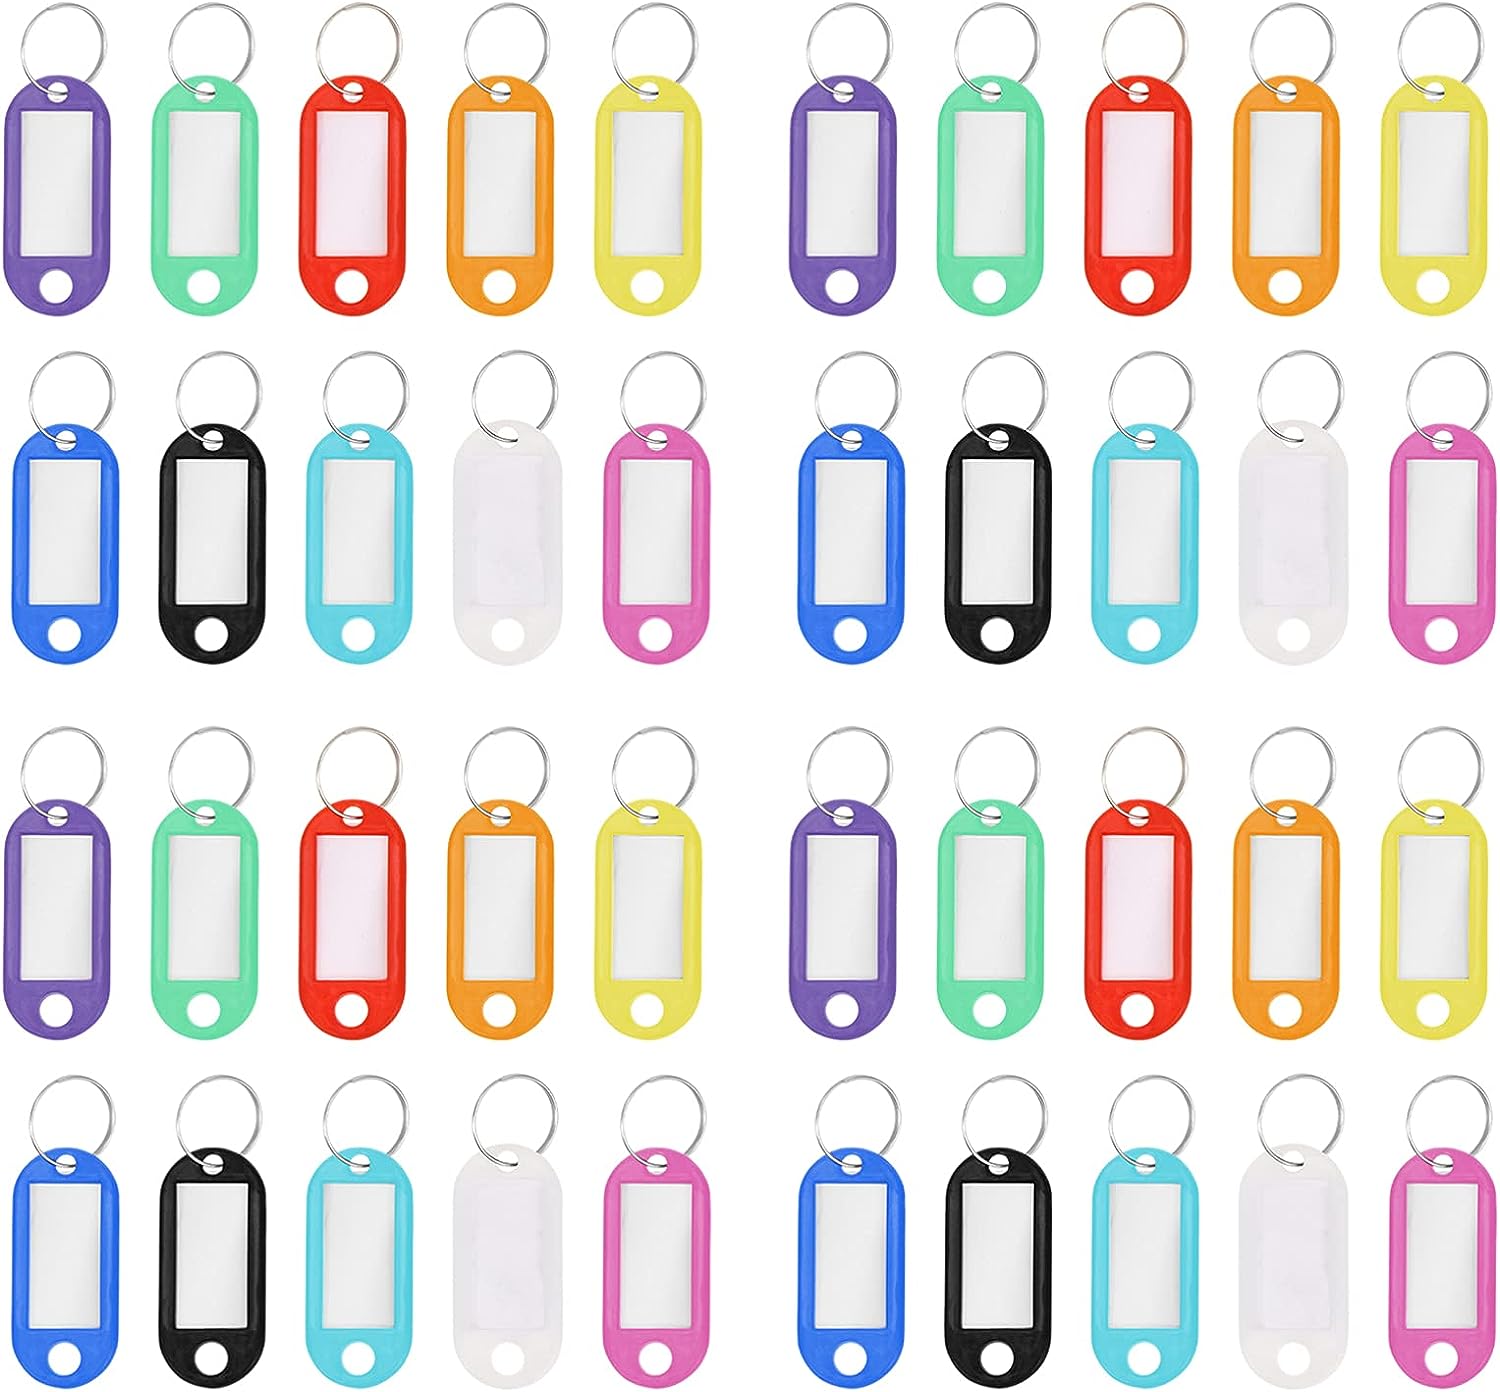 TOSEERY Key Chain Bulk Car Bling Accessories 50pcs Key ID Label Tags Key Labels Plastic Key Chain Tags Hotel Key Tags with Ring for Name Tag